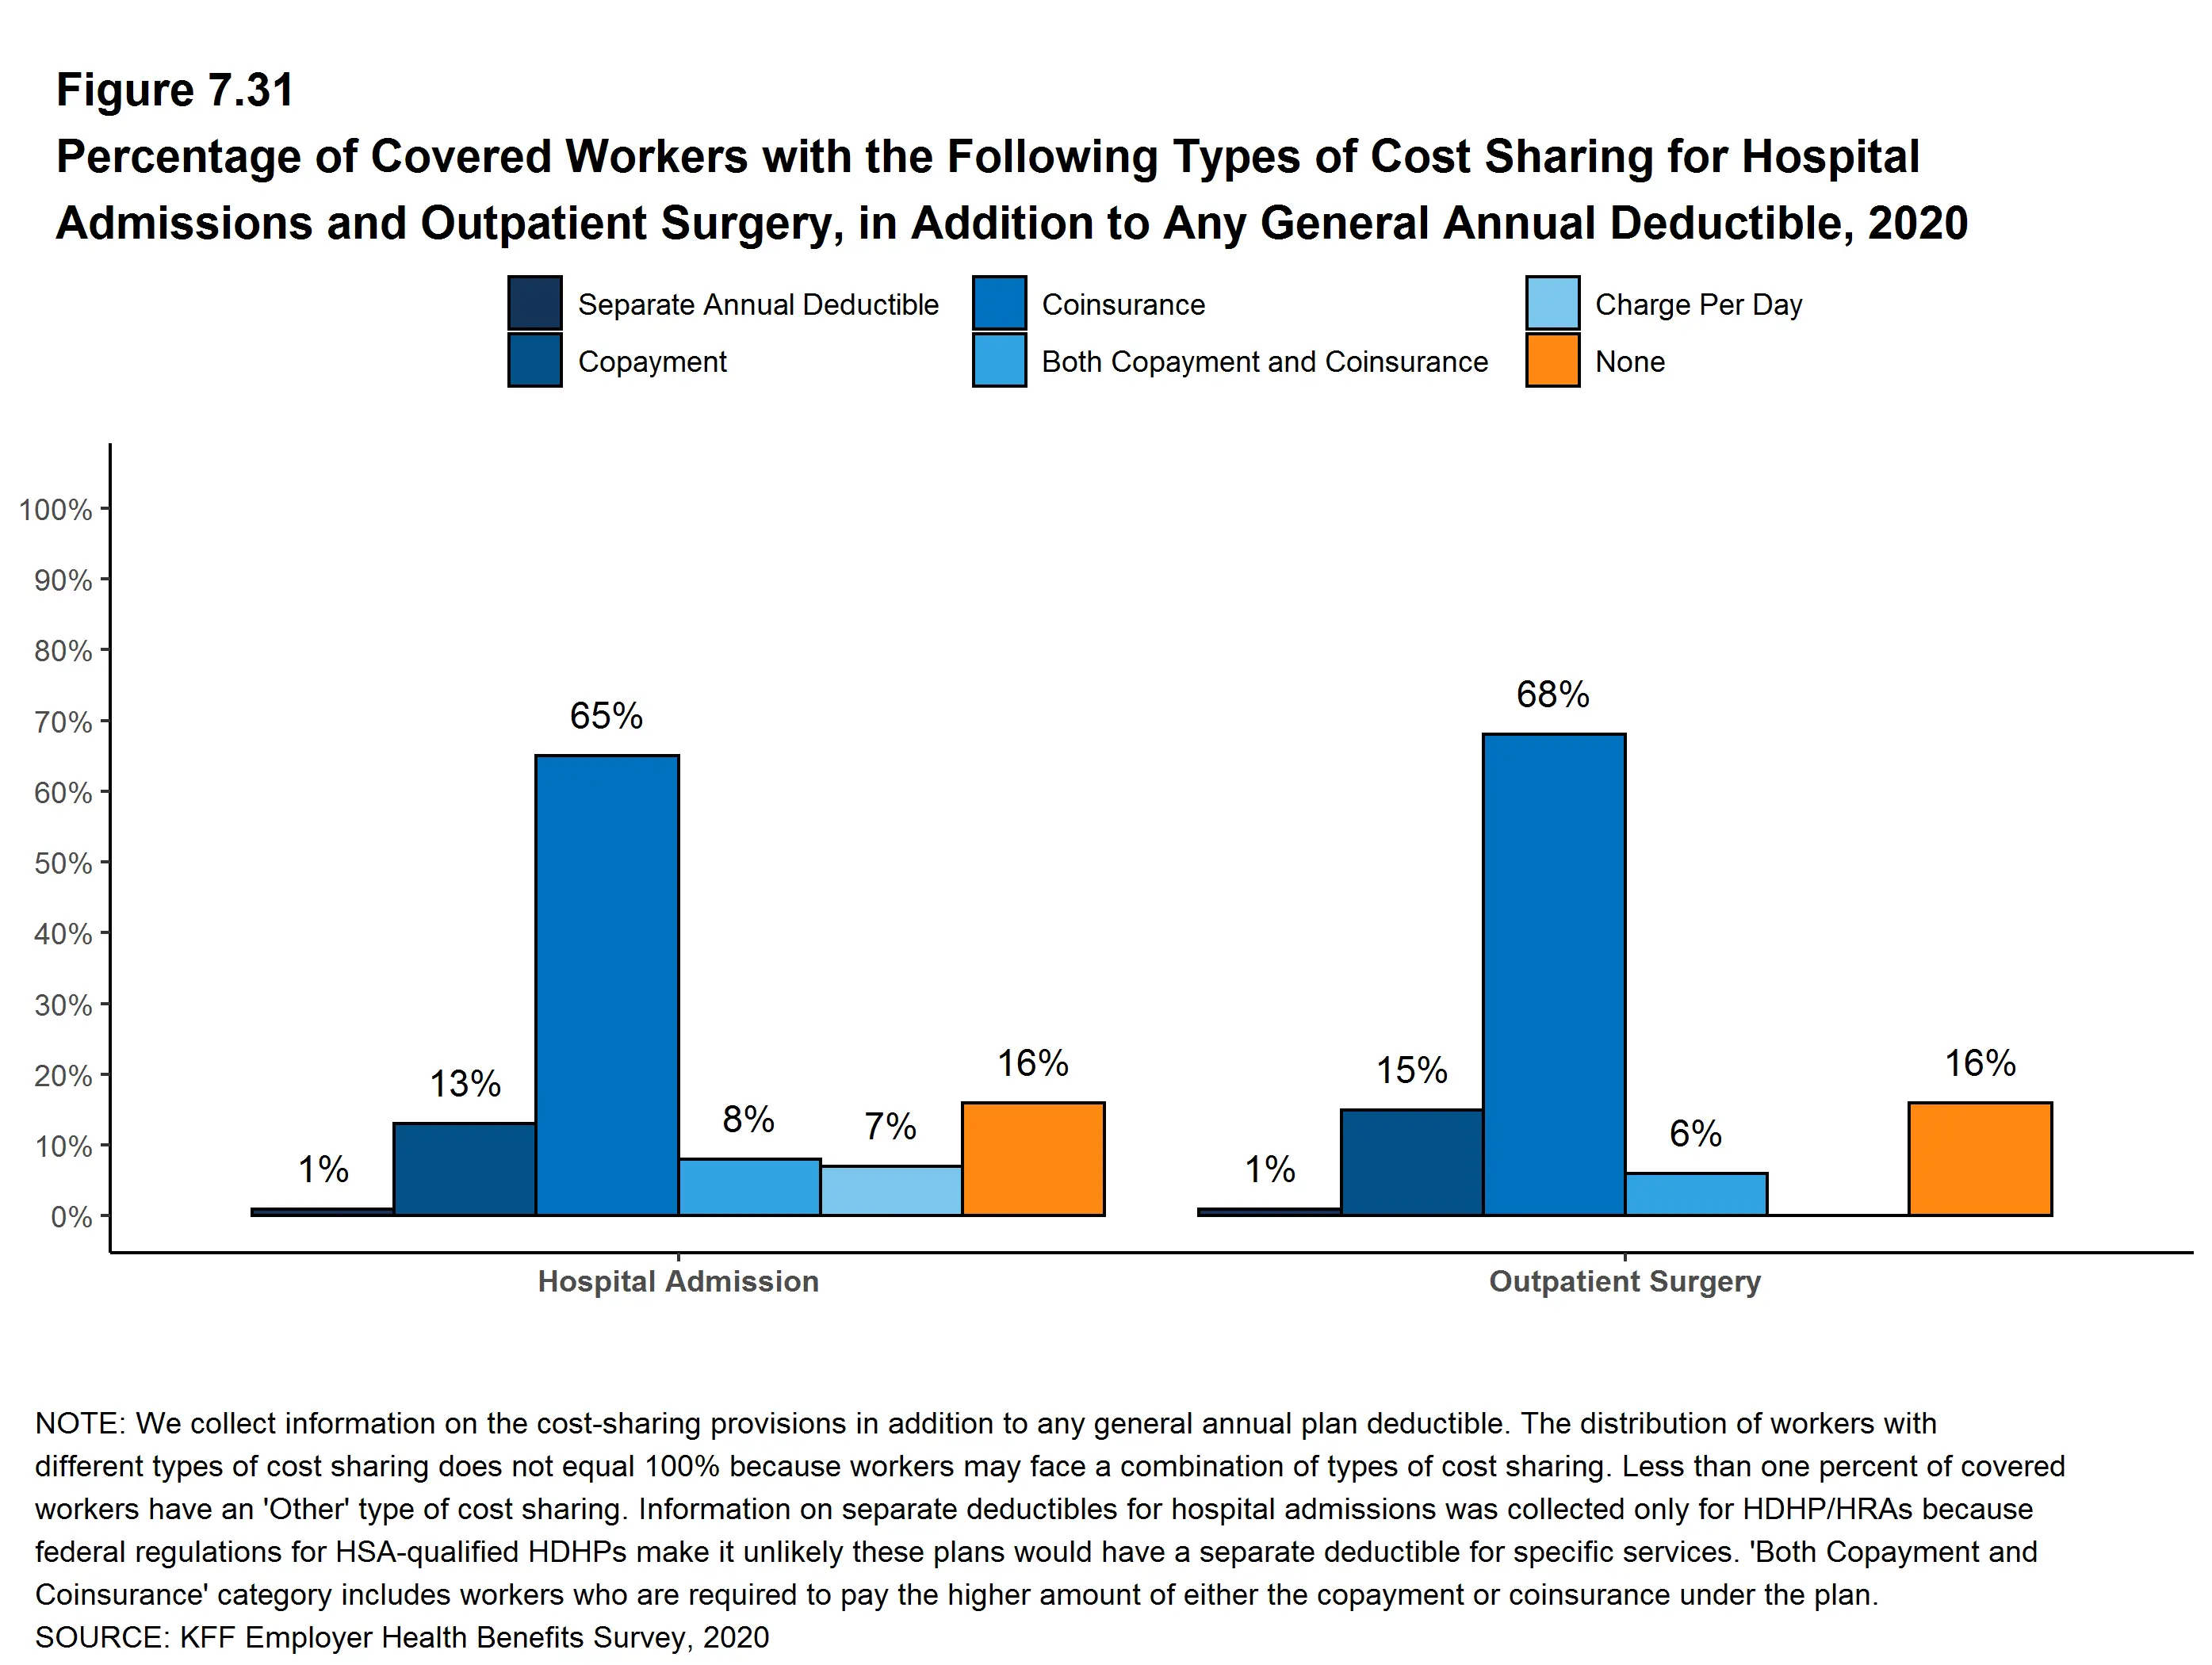 Percentage of Covered Workers With the Following Types of Cost Sharing ...